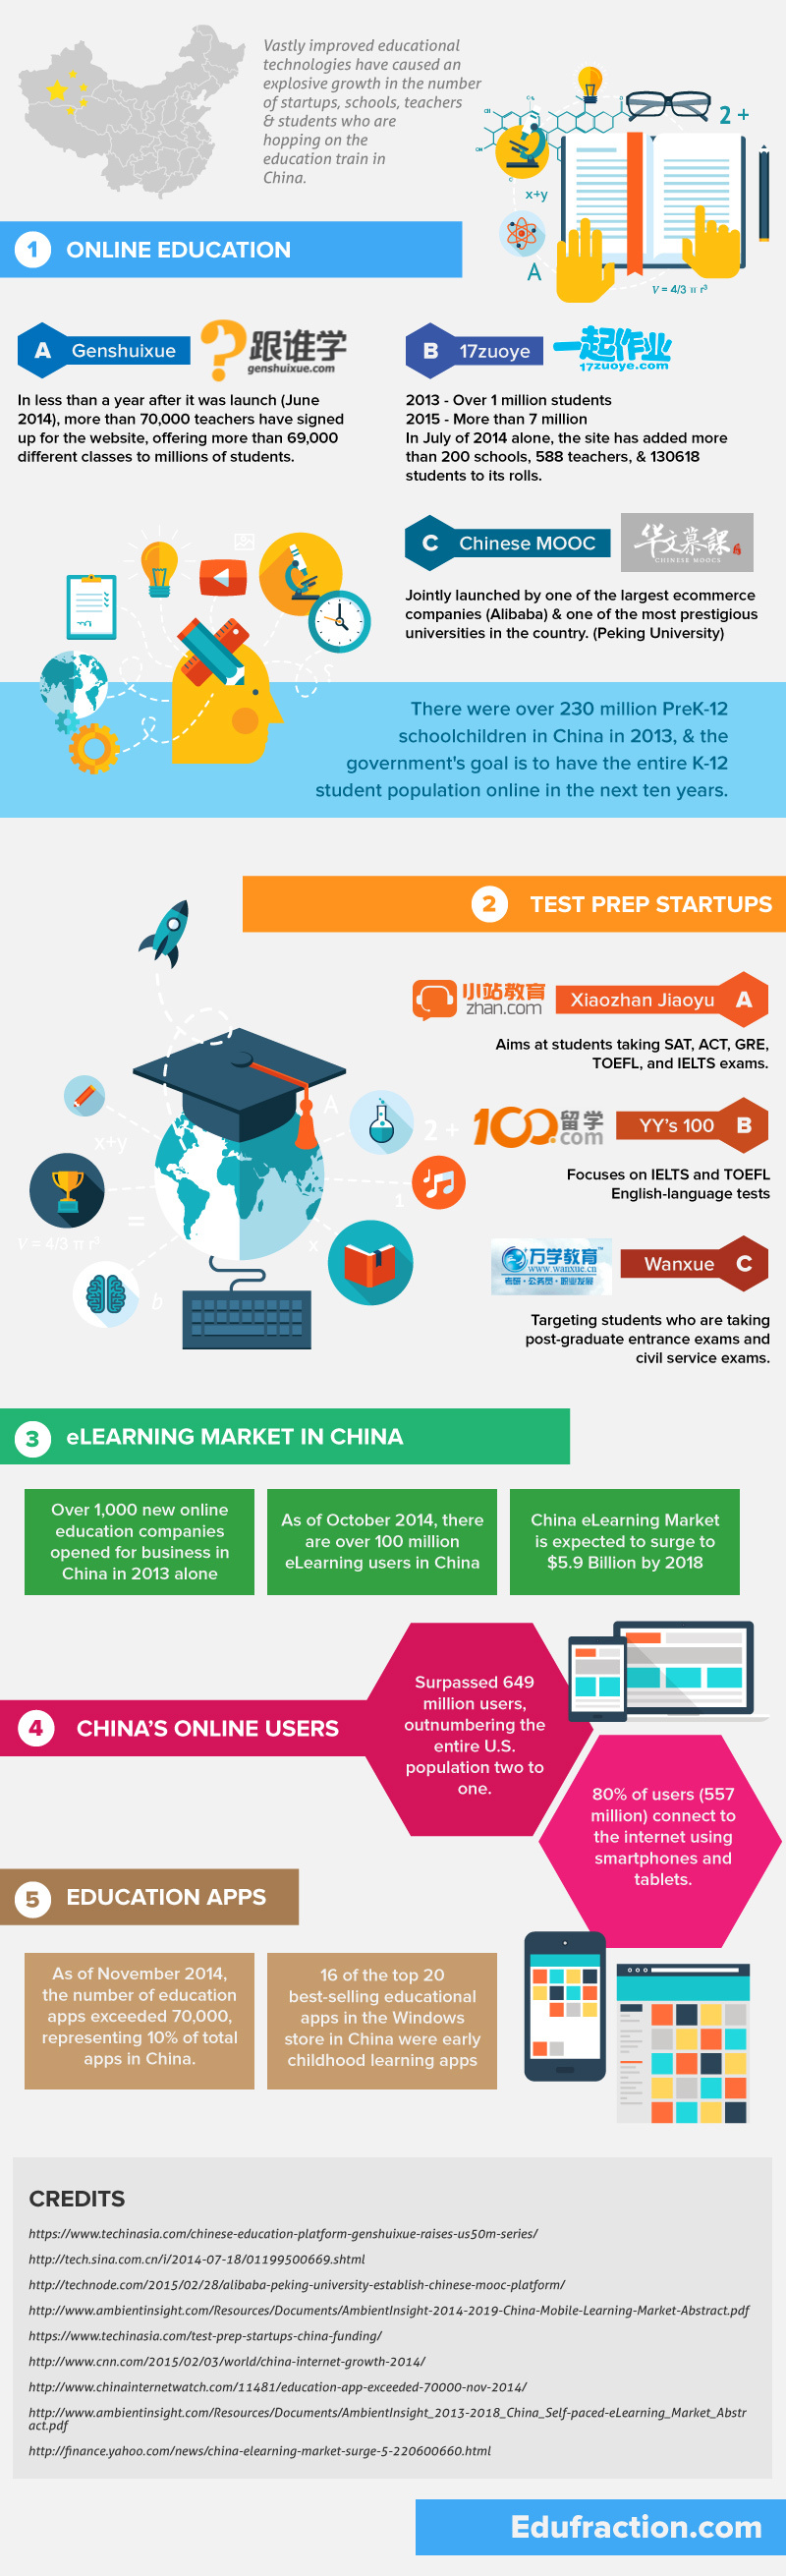 Infographic Online Education in China